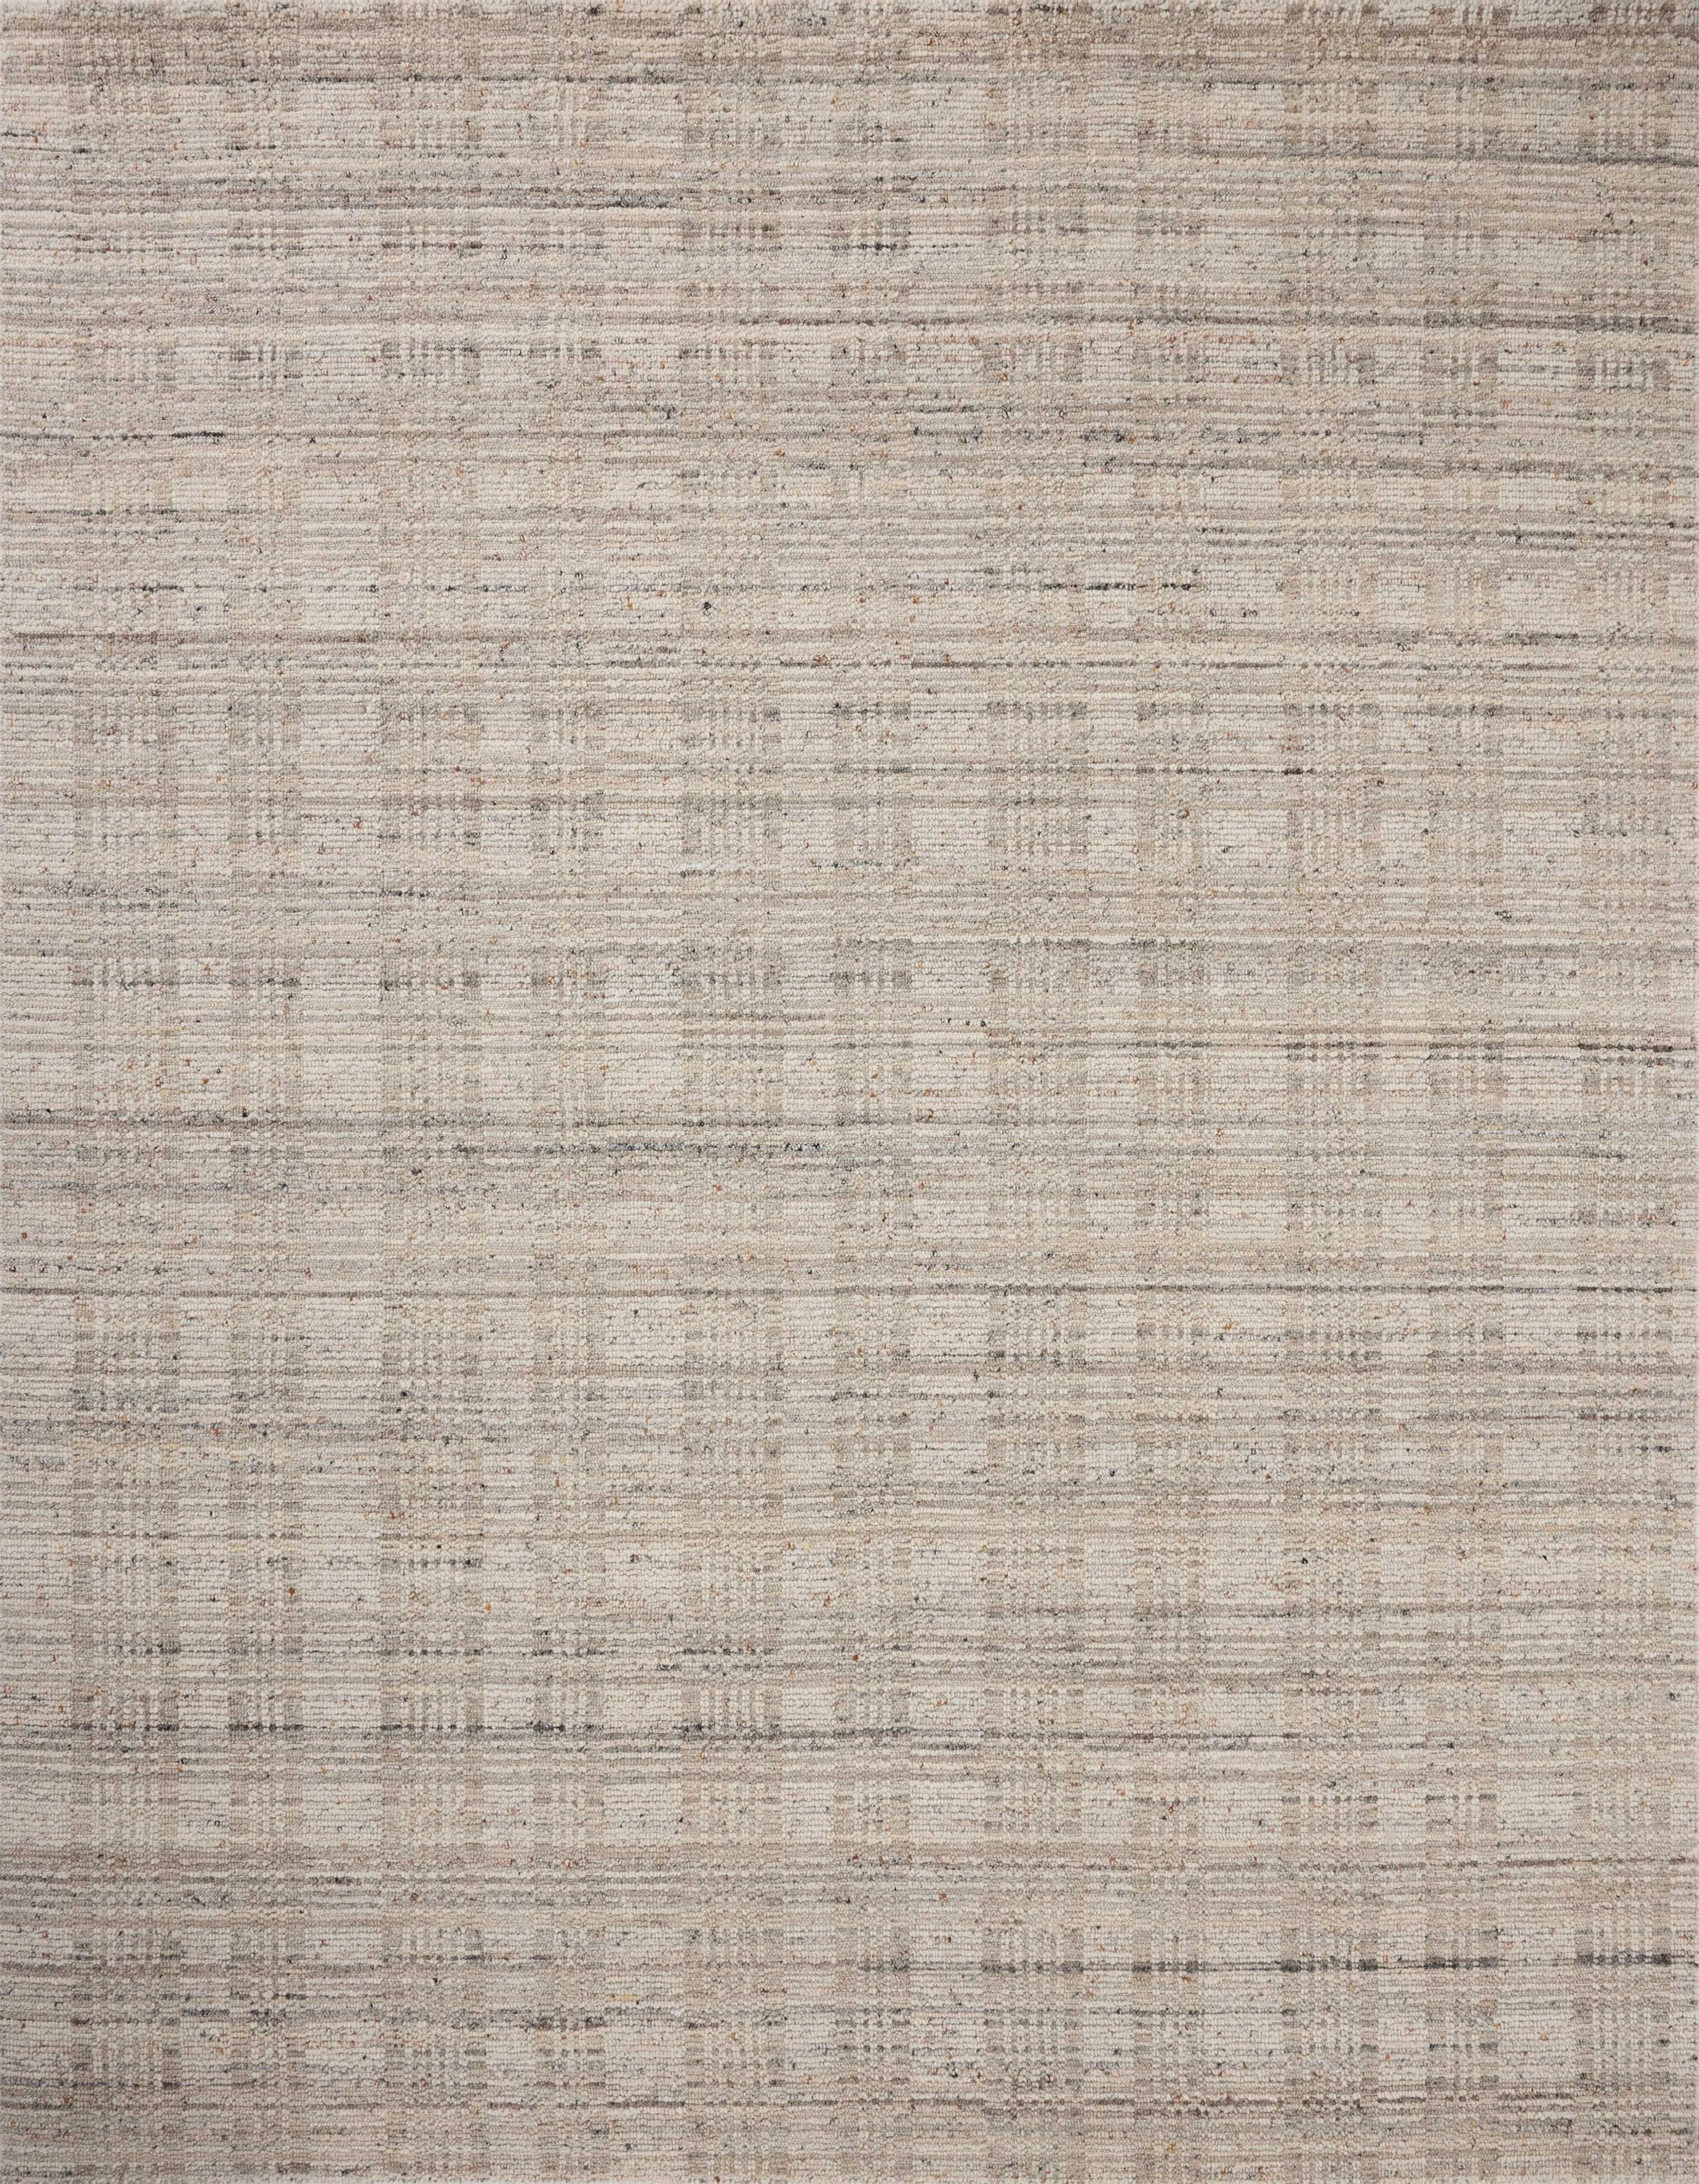 The Sonya Pebble / Fog Rug is a hand-loomed area rug with a light, airy palette and understated graphic design. The rug’s textural pile is a soft blend of wool and nylon that creates dimension in living rooms, bedrooms, and more. Amethyst Home provides interior design, new home construction design consulting, vintage area rugs, and lighting in the Park City metro area.